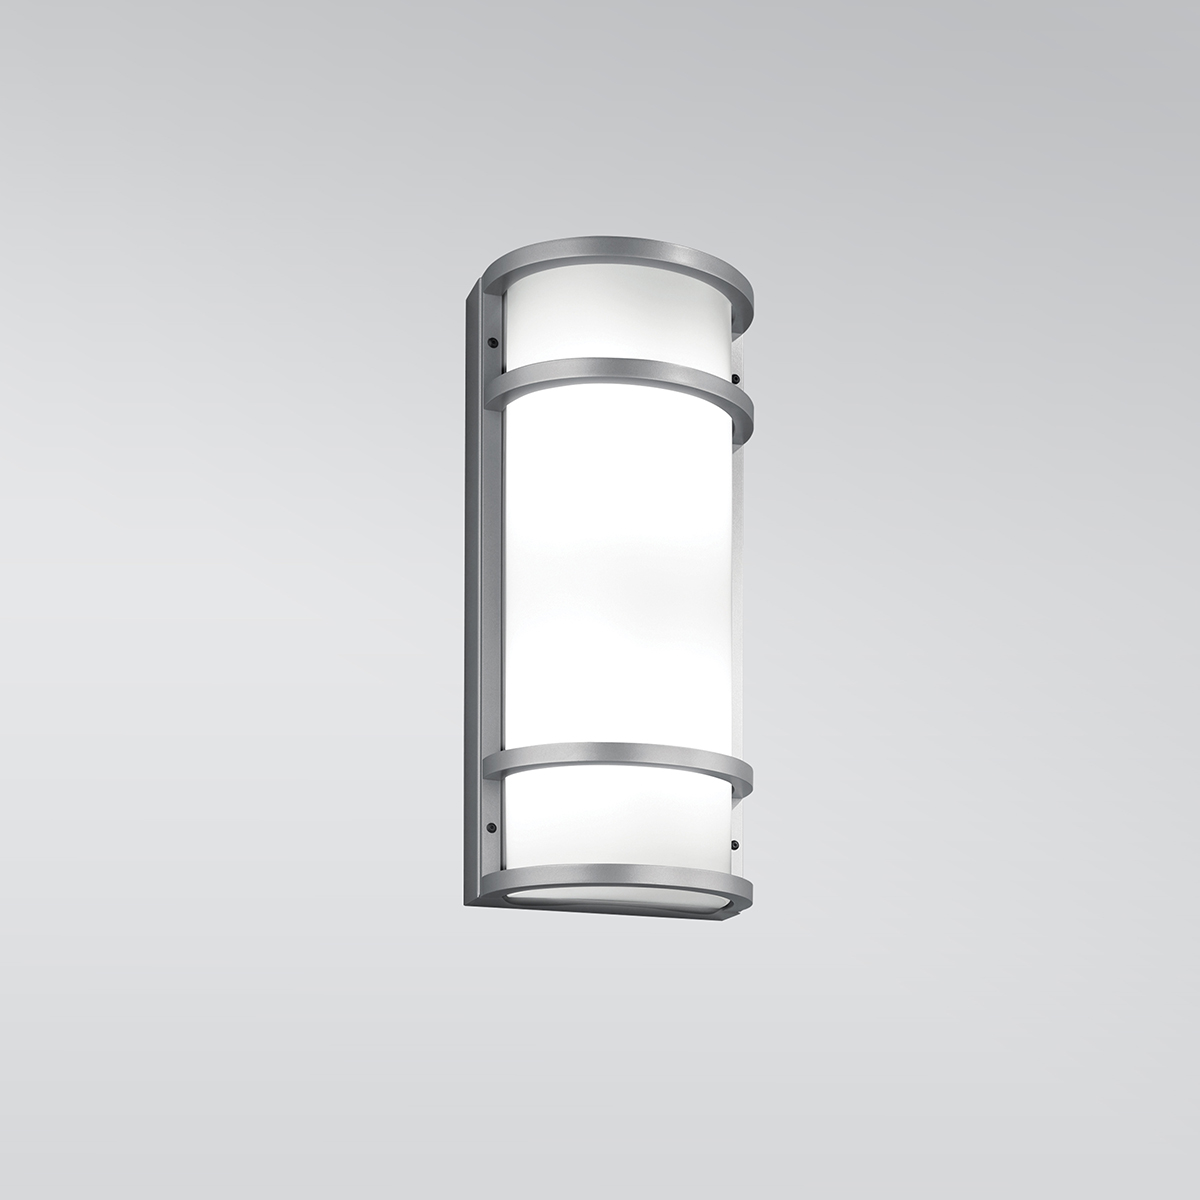 A rectangular outdoor wall sconce with single bar accents